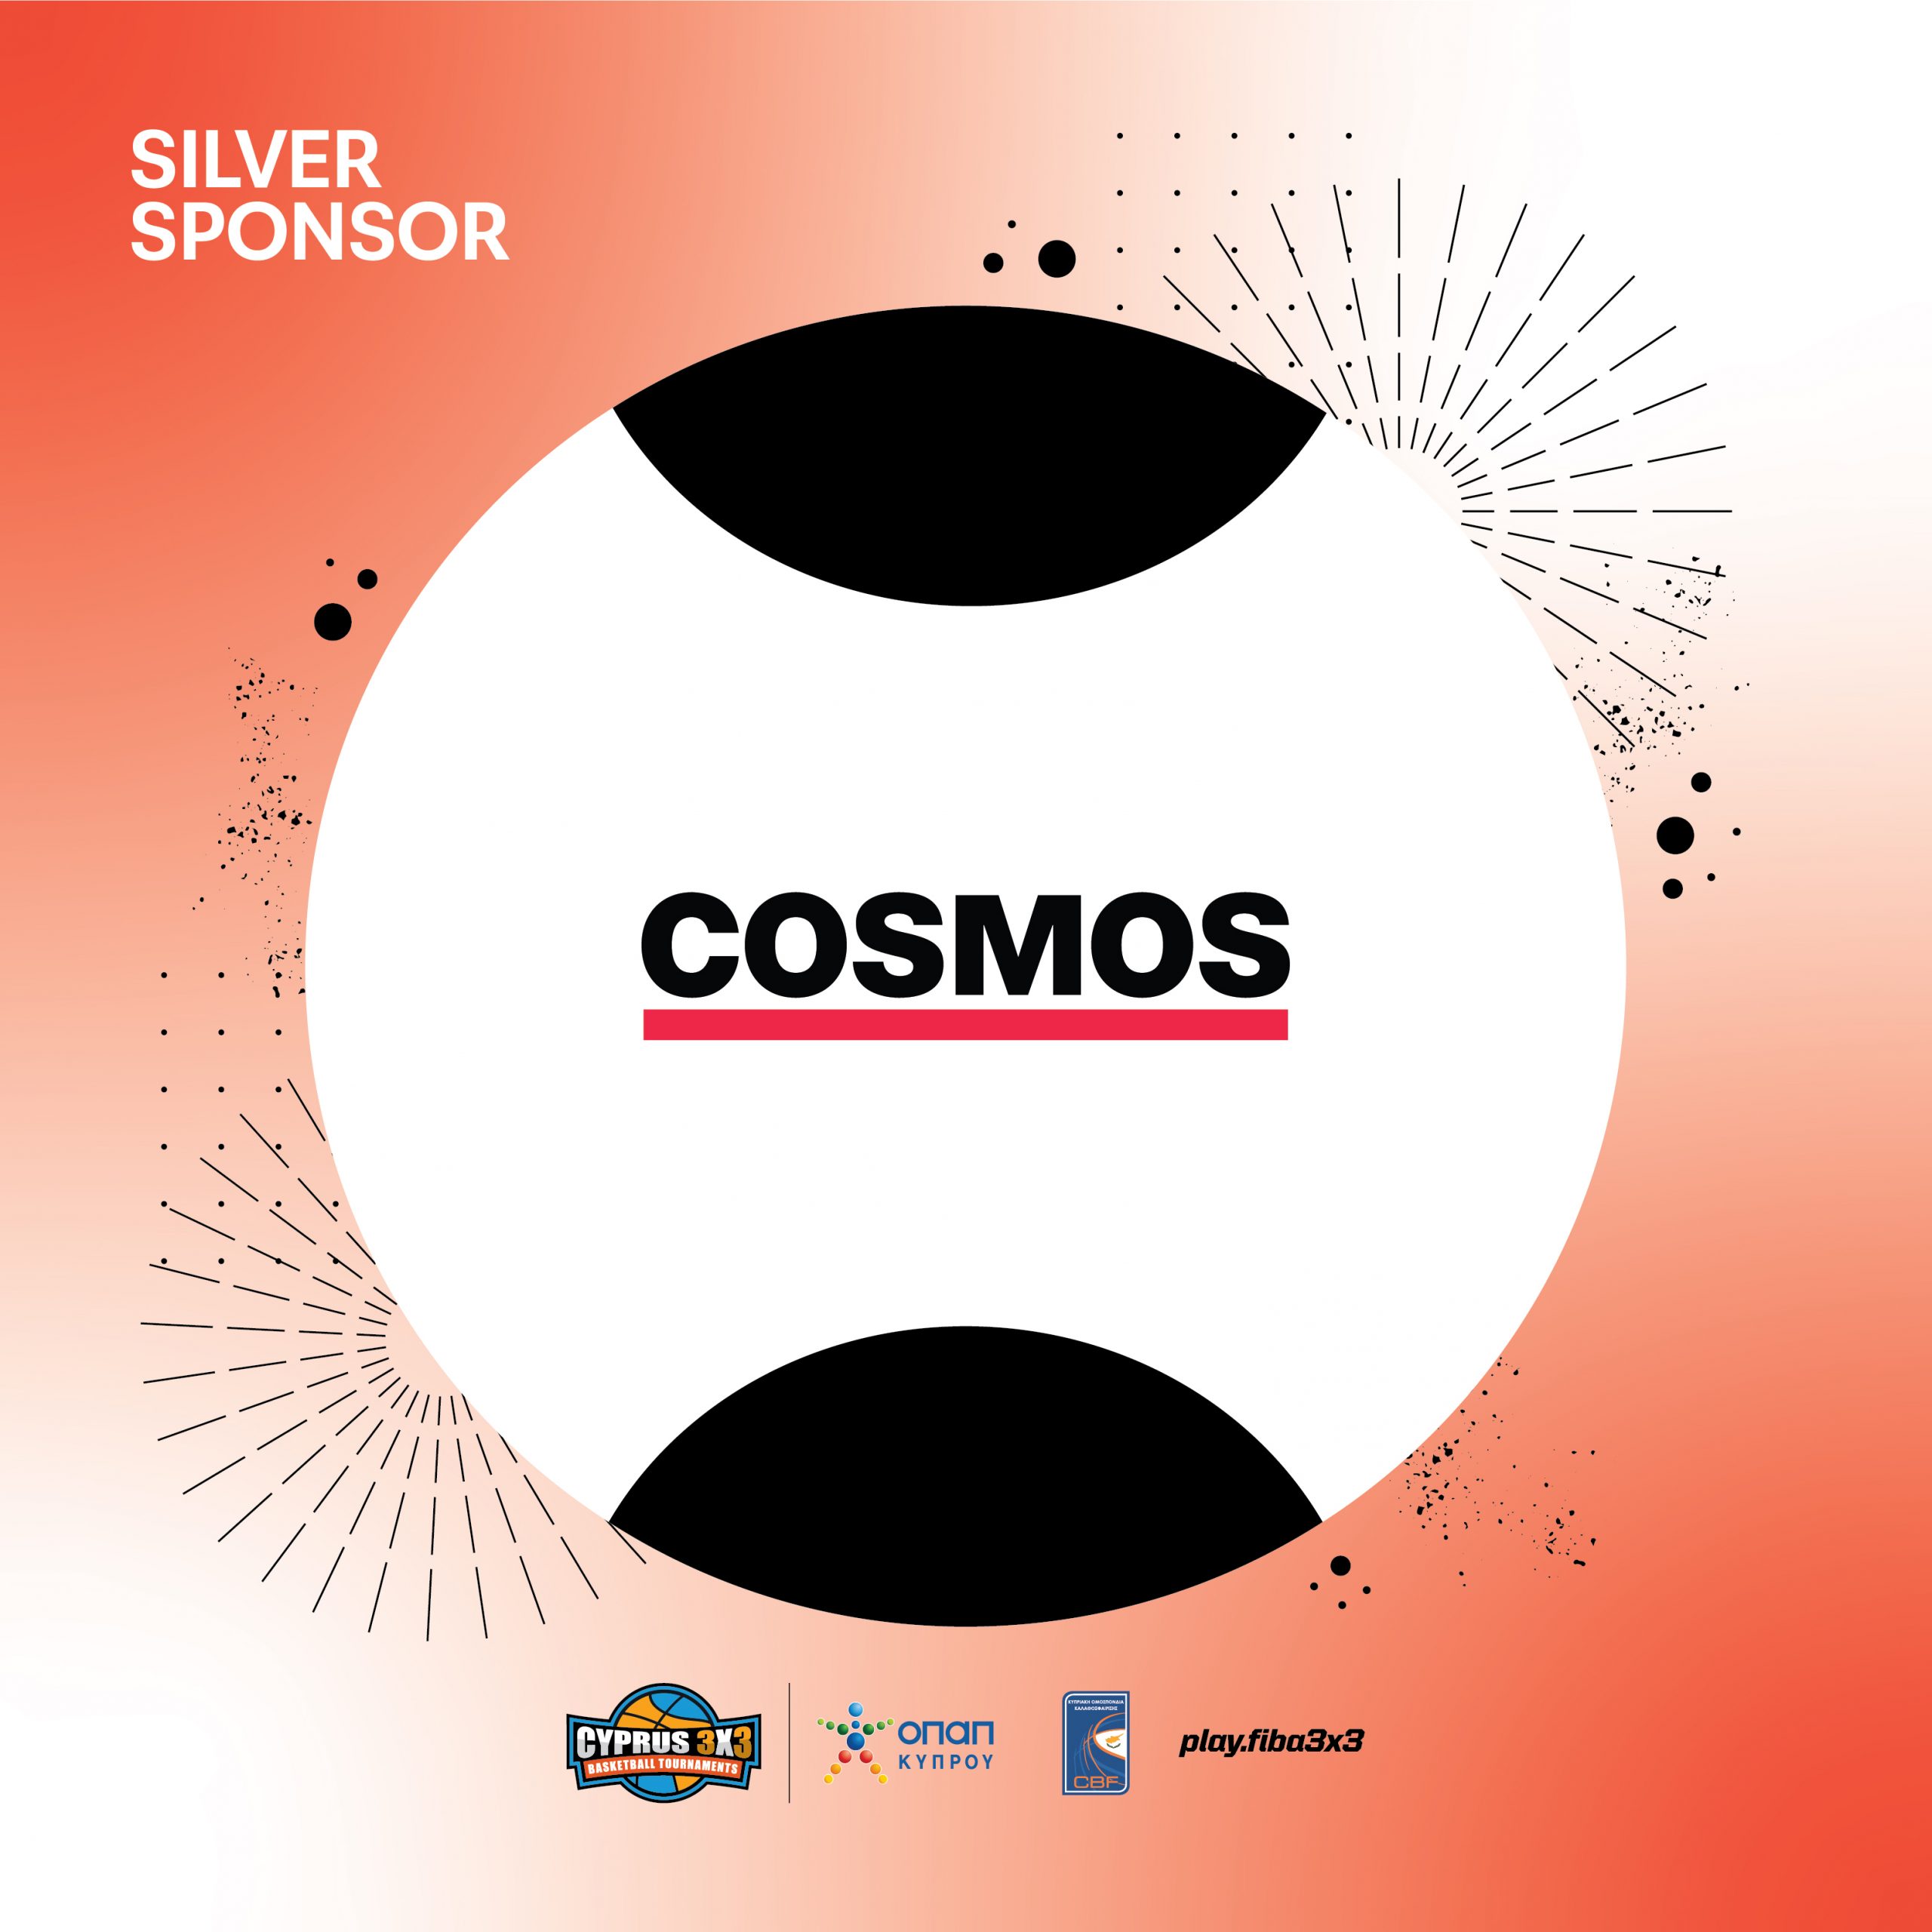 You are currently viewing COSMOS – NEW SILVER SPONSOR!